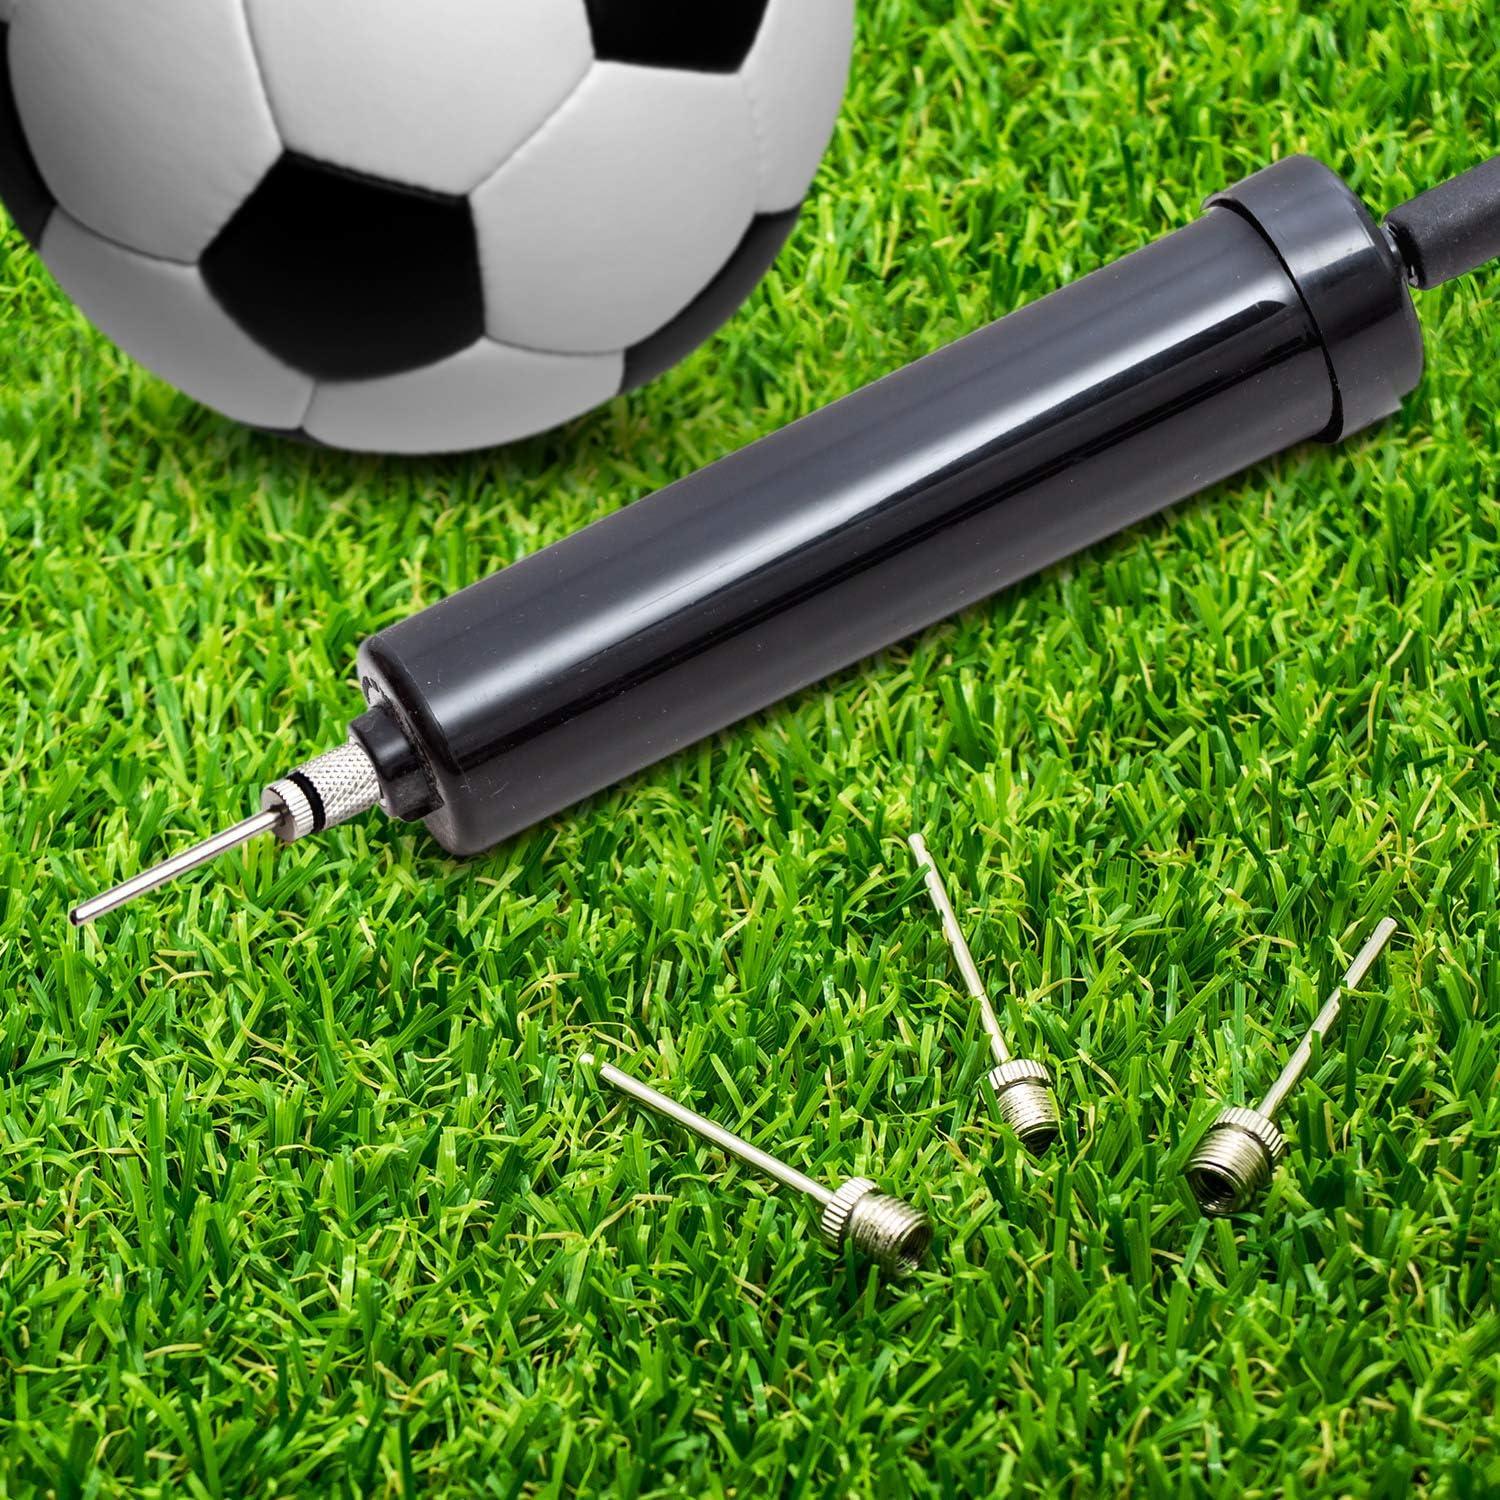 30 pcs Ball Pump Needle with Storage Box Air Inflation Needle for Football  Basketball Soccer Volleyball Ball Sports